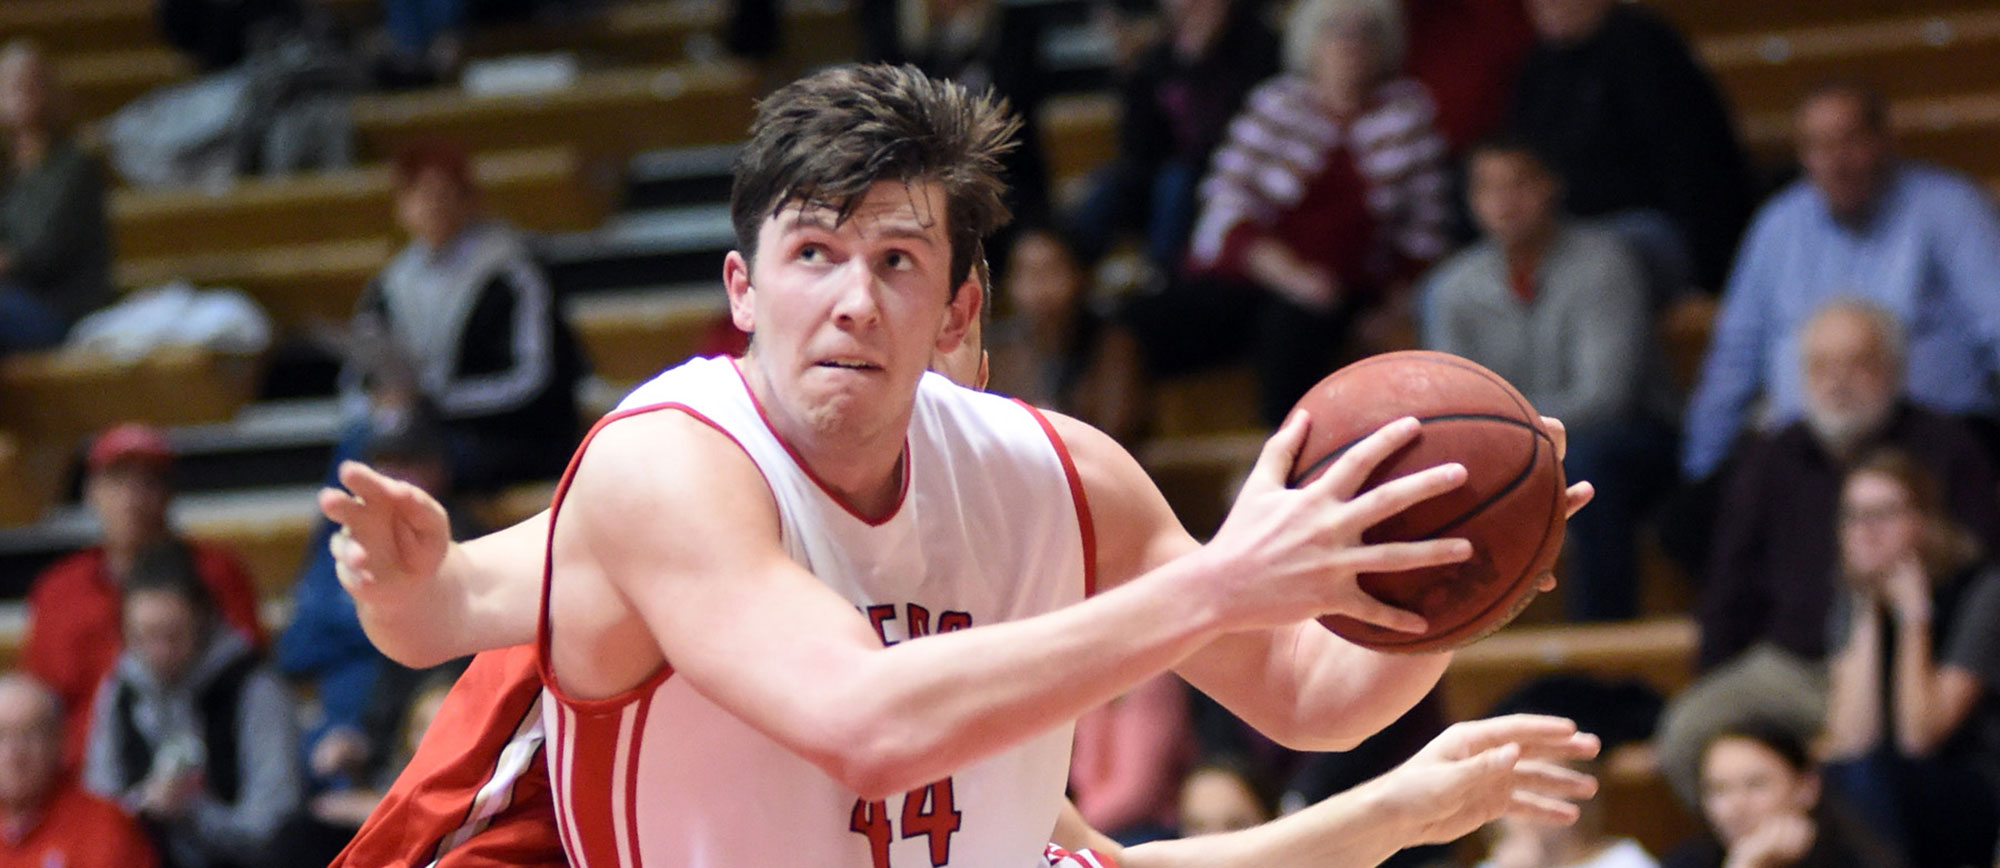 Chris Sloneker and the Tigers topped Oberlin in their 2015-16 NCAC opener. File Photo | Nick Falzerano